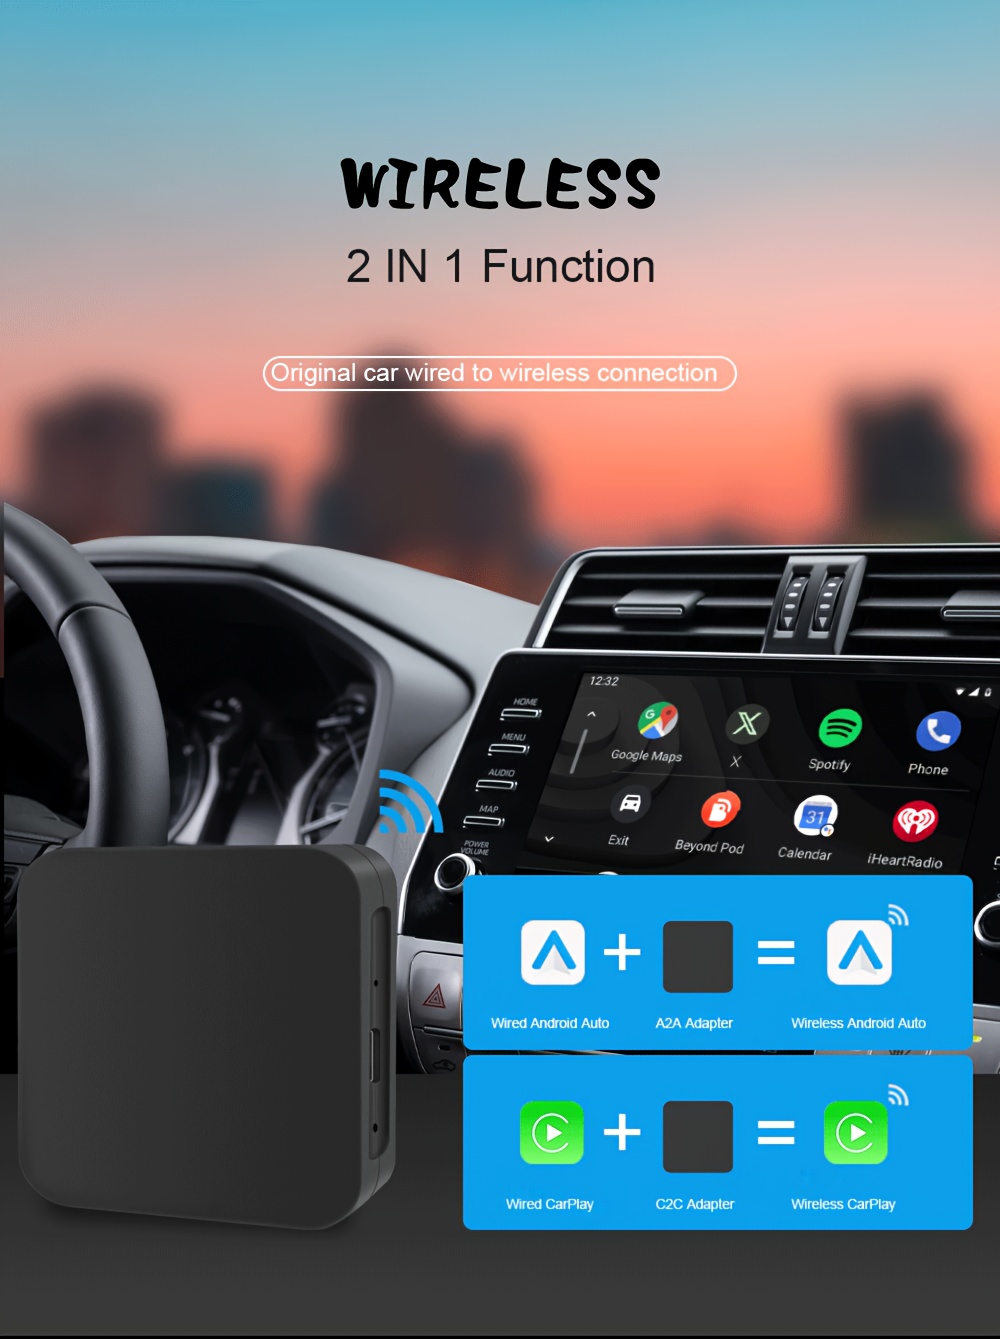 2024 New 2 In 1 Android Auto +carplay, Wireless To Wired Android Auto Box  Wireless Ai Auto Connect Usb Box For 2017 + Cars., Today's Best Daily  Deals